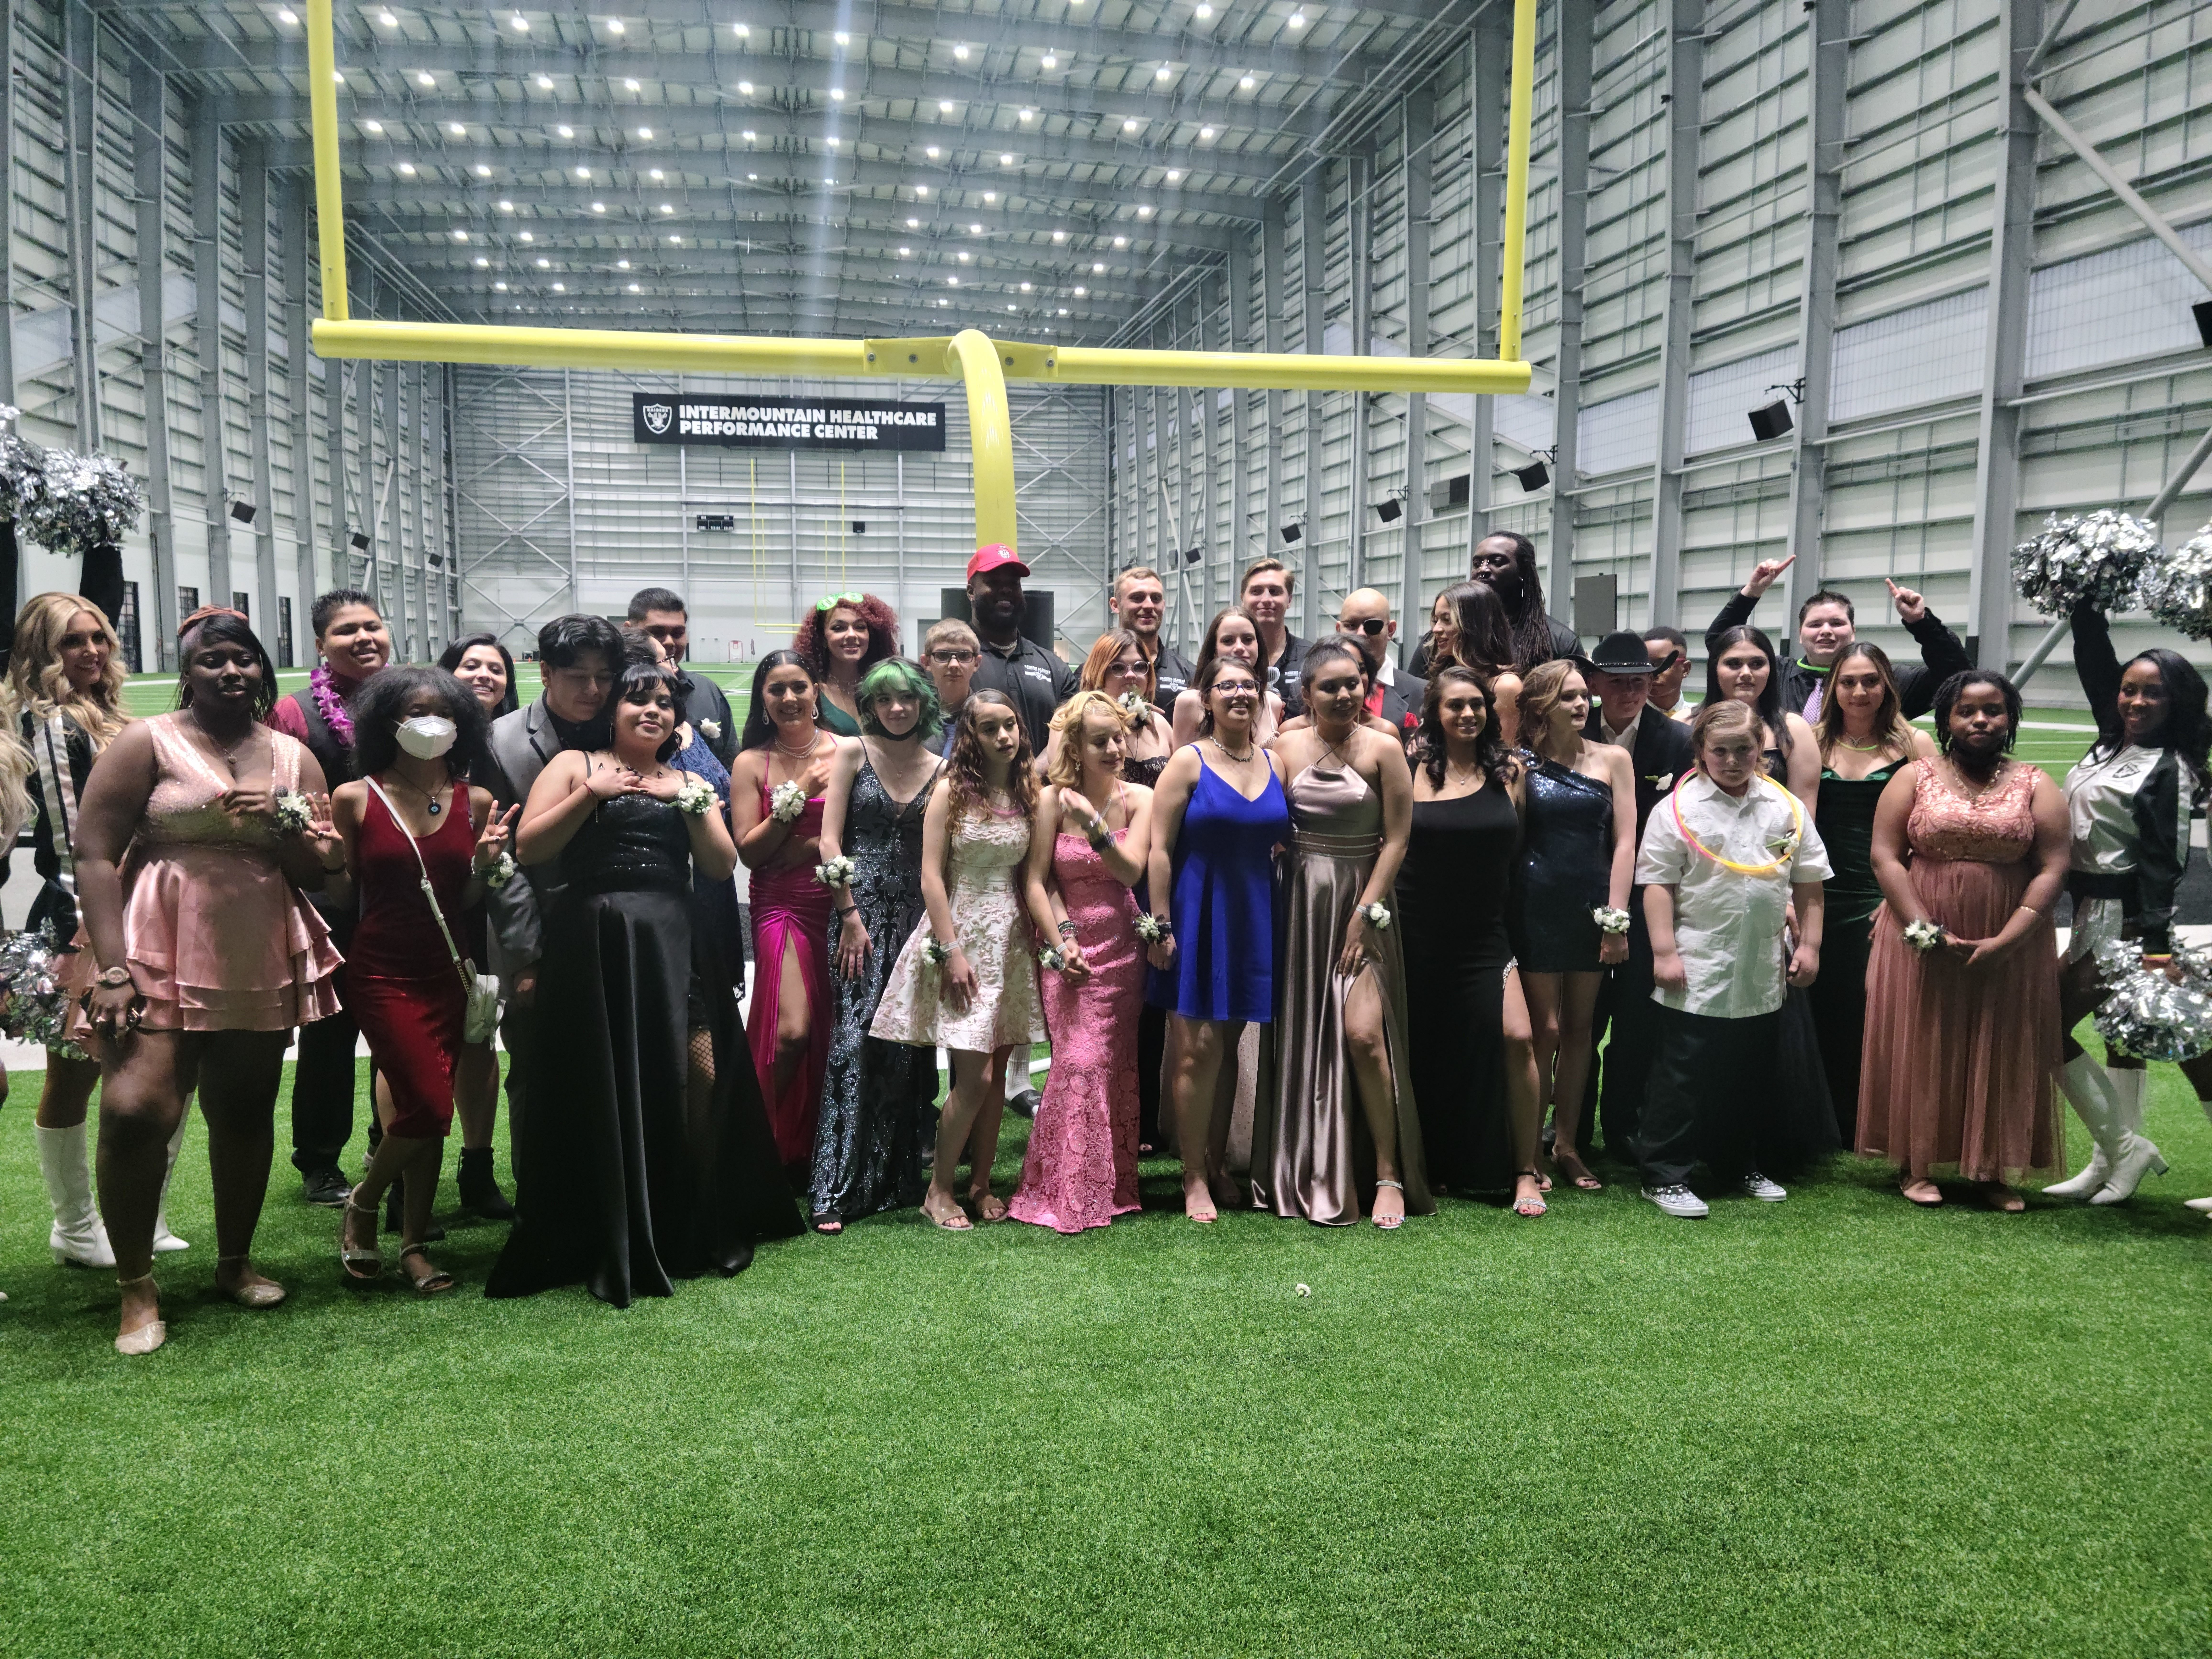 Las Vegas Raiders Hold A Special Prom for Local Teens